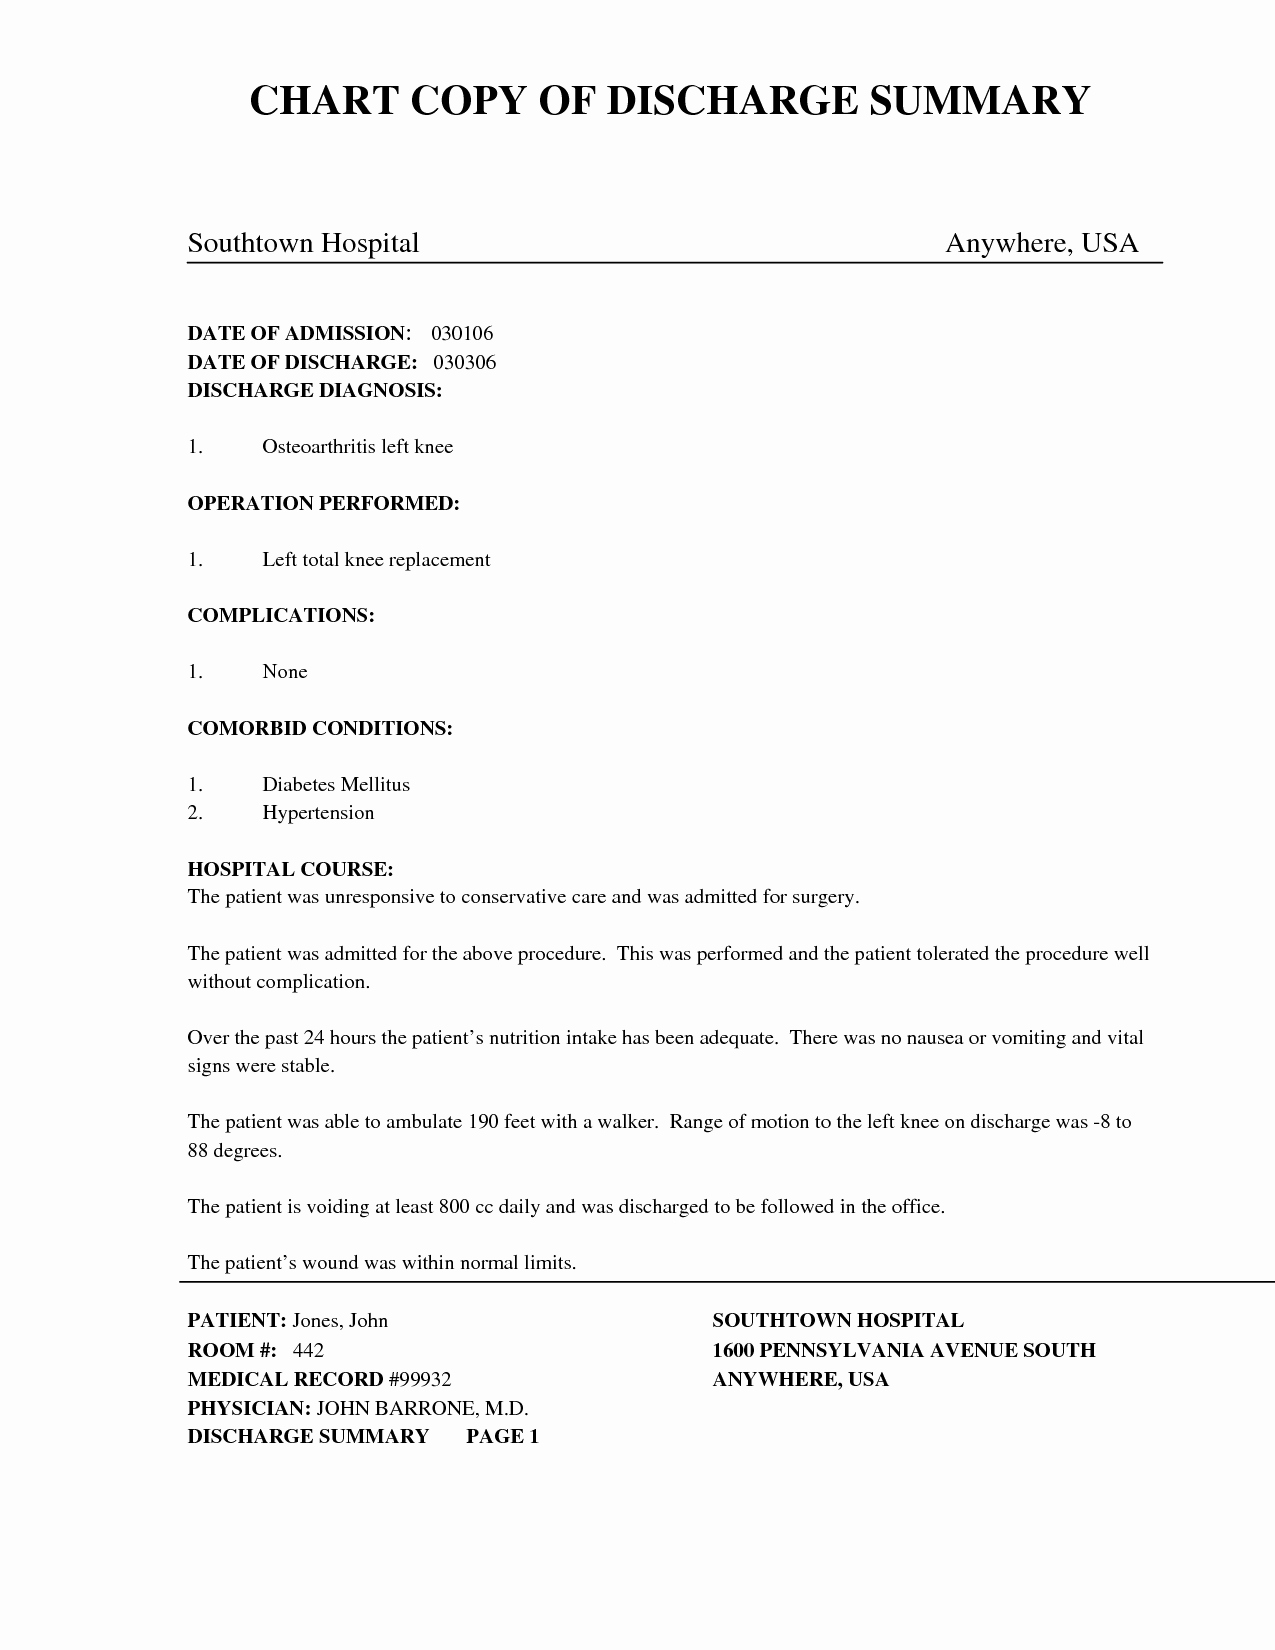 Hospital Discharge Summary Template Lovely Discharge Summary Template